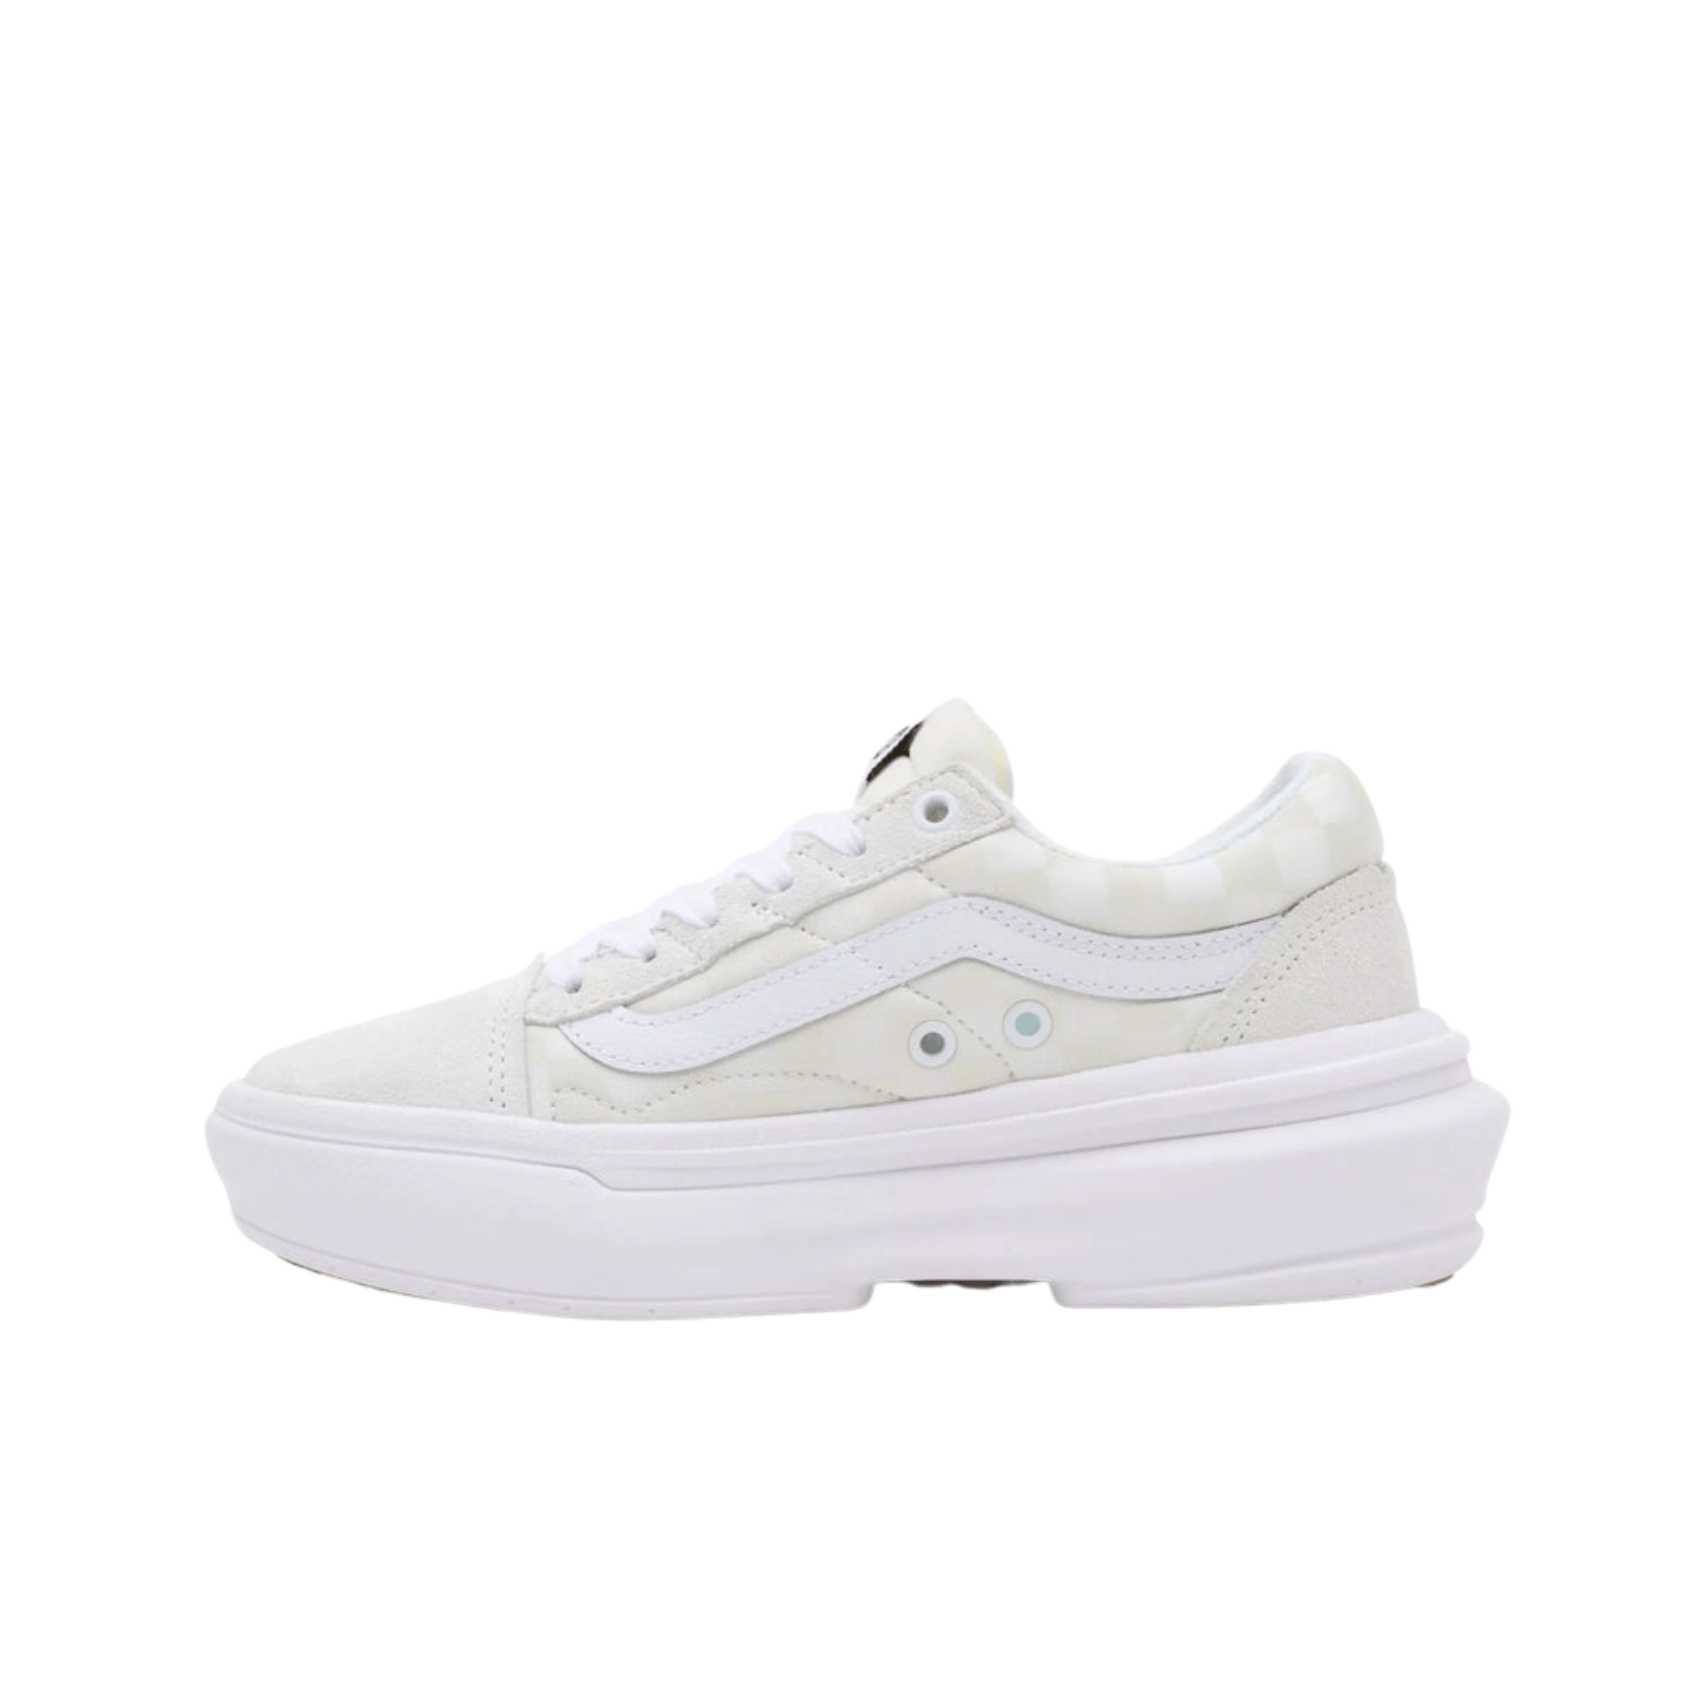 Old Skool Over - Checkerboard White